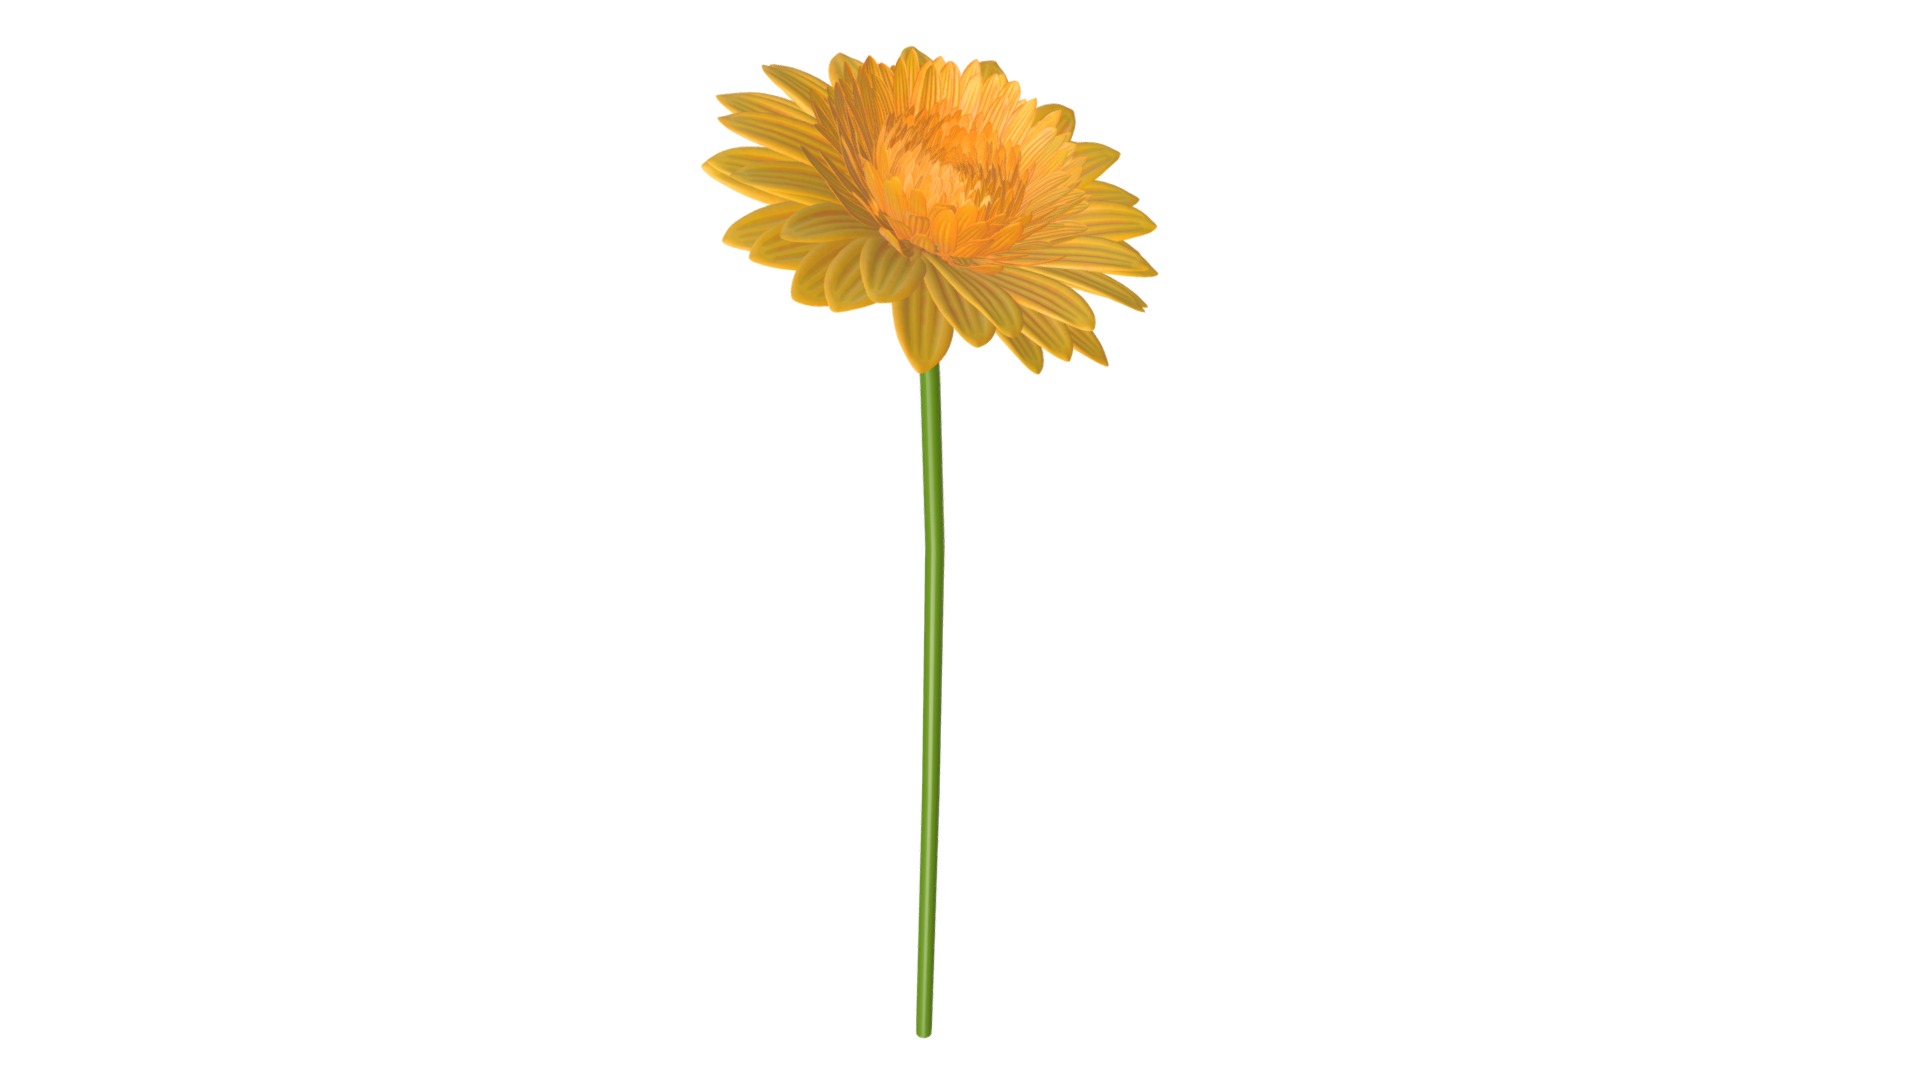 3D model Gerbera flower - This is a 3D model of the Gerbera flower. The 3D model is about a yellow flower with a green stem.